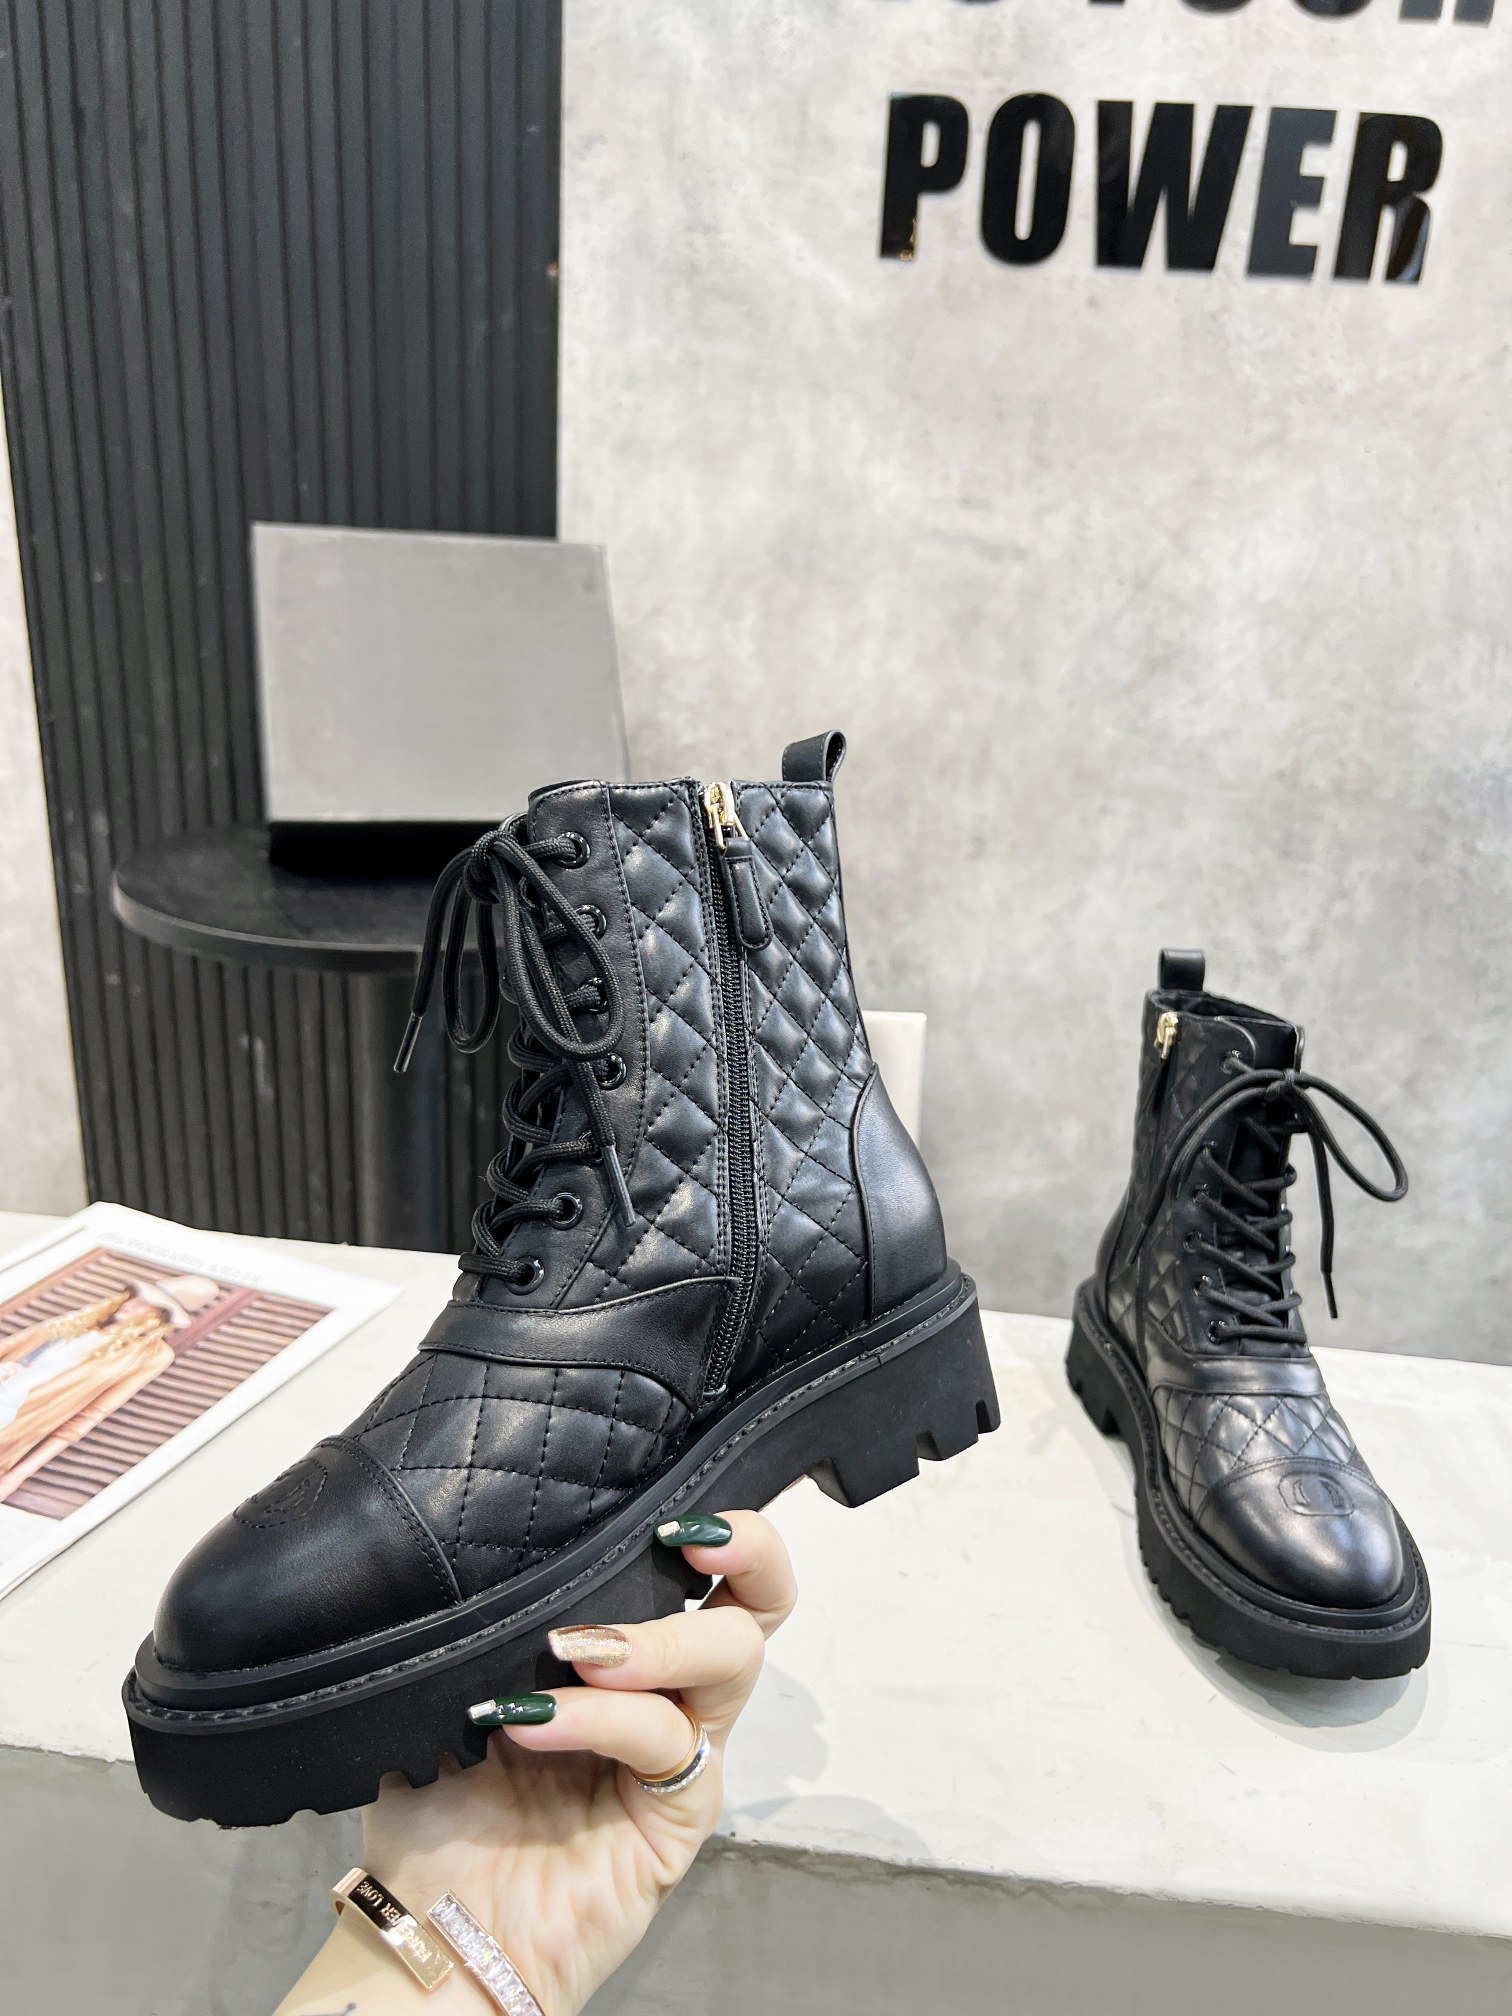 2022 Designer Fall Winter Boots Brand Lace Up Women's Leather Shoes Zip Platform Flat Heel Bootss Black White Checkered Street Leather Boot With Box